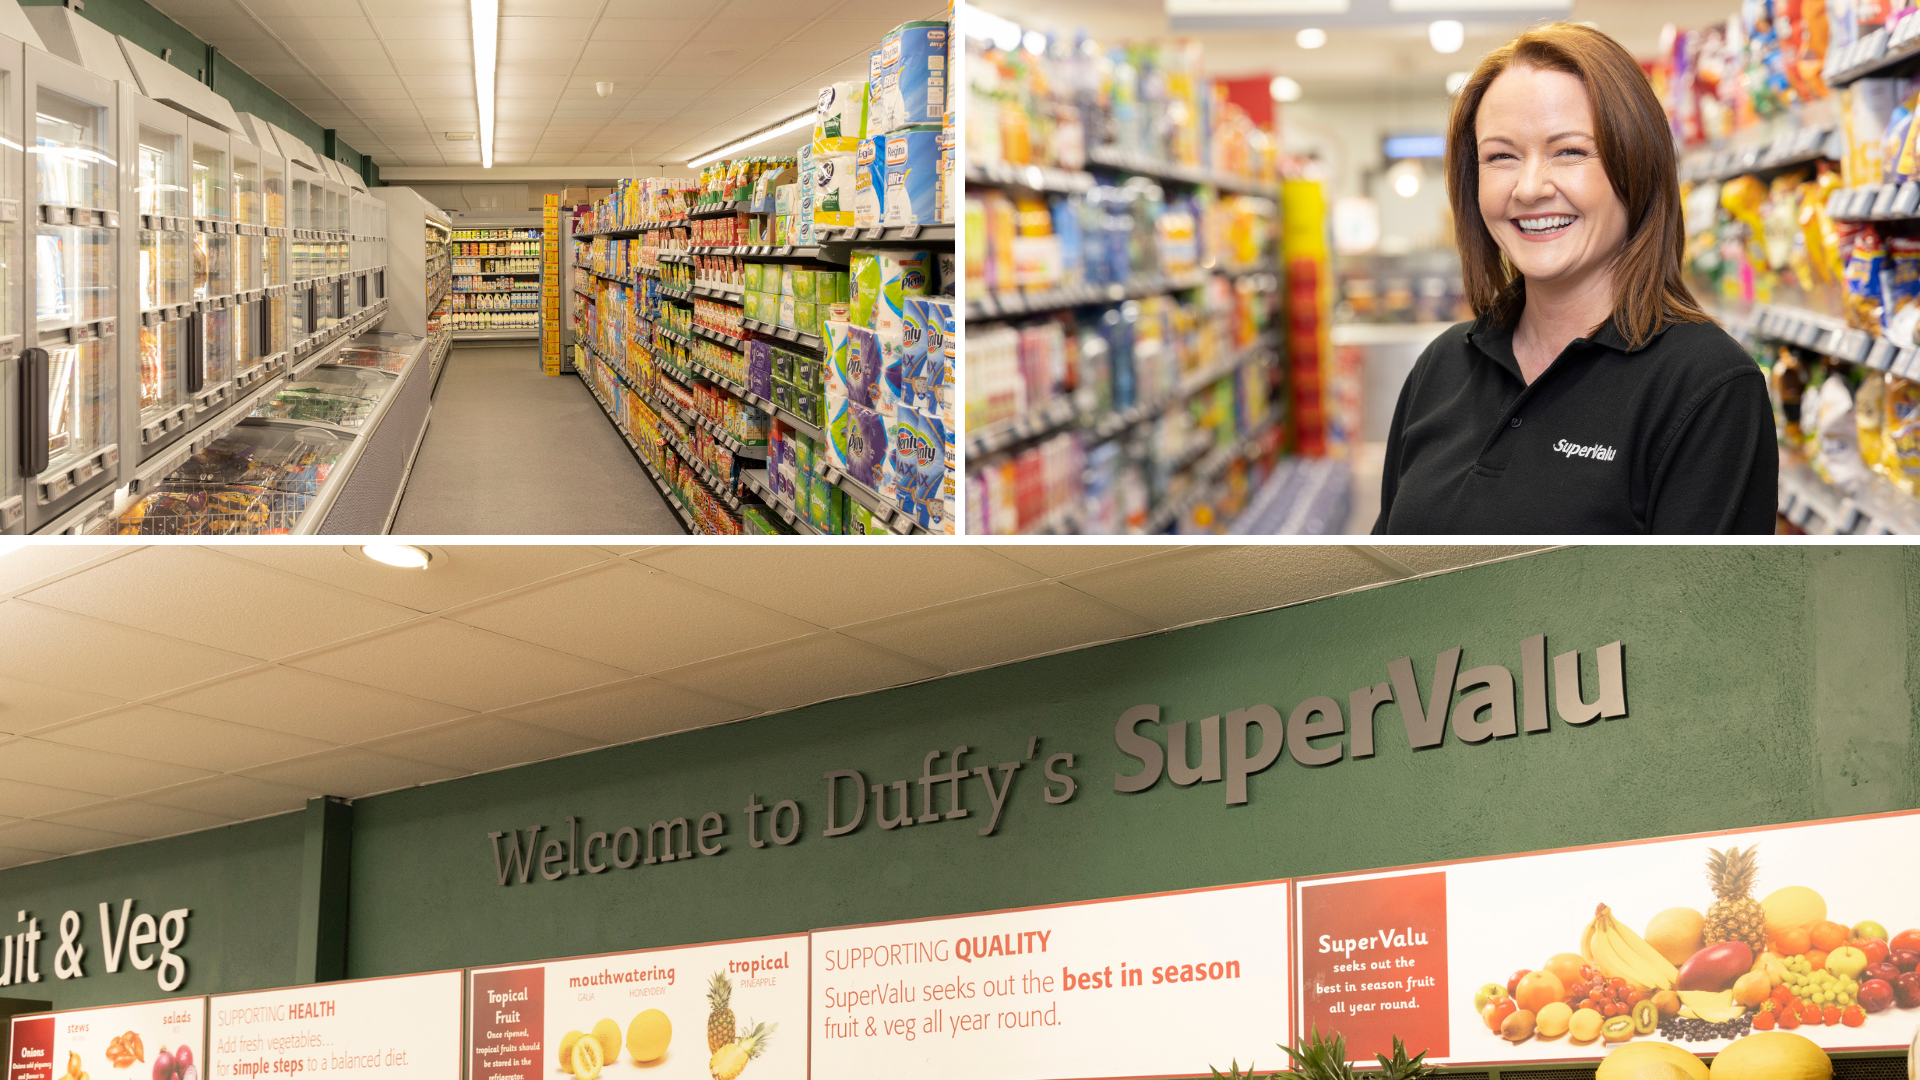 Guaranteed Irish Members, Energia and Supervalu Team up to upgrade Lighting in stores using high quality, energy efficient LEDs